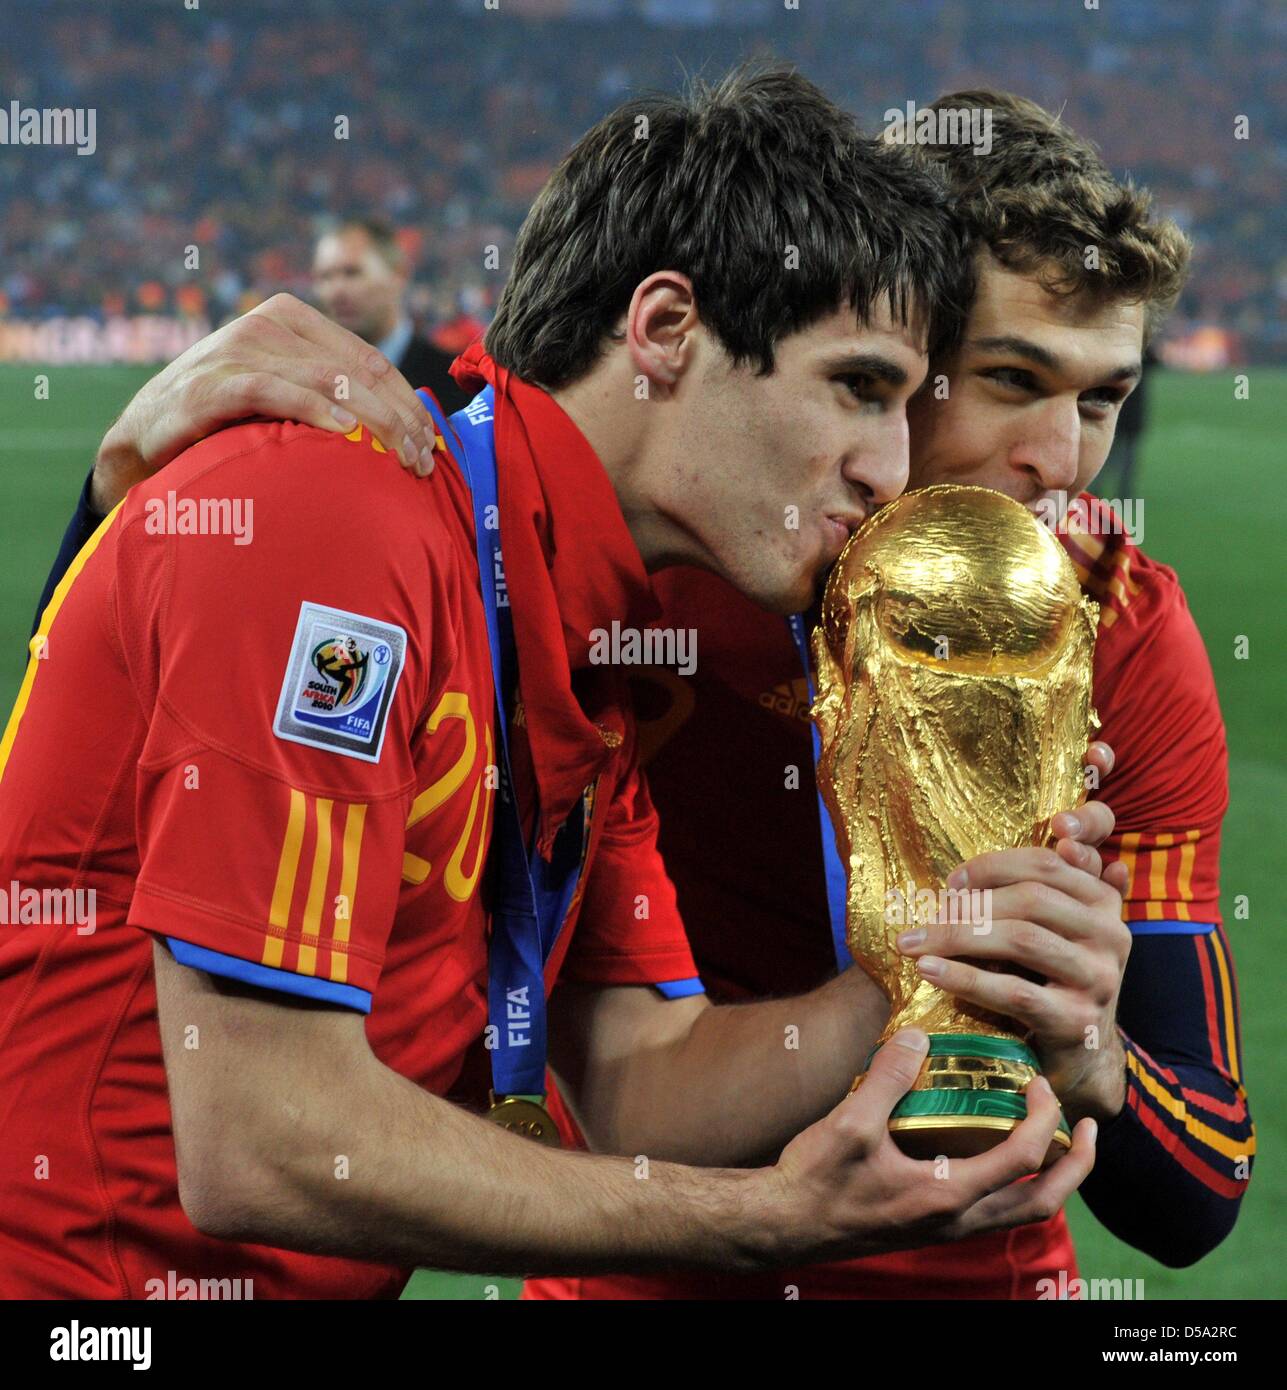 Javier Martinez (L) and Fernando Llorente of Spain celebrate with the trophy after the 2010 FIFA World Cup final match between the Netherlands and Spain at the Soccer City Stadium in Johannesburg, South Africa 11 July 2010. Photo: Bernd Weissbrod dpa - Please refer to http://dpaq.de/FIFA-WM2010-TC Stock Photo